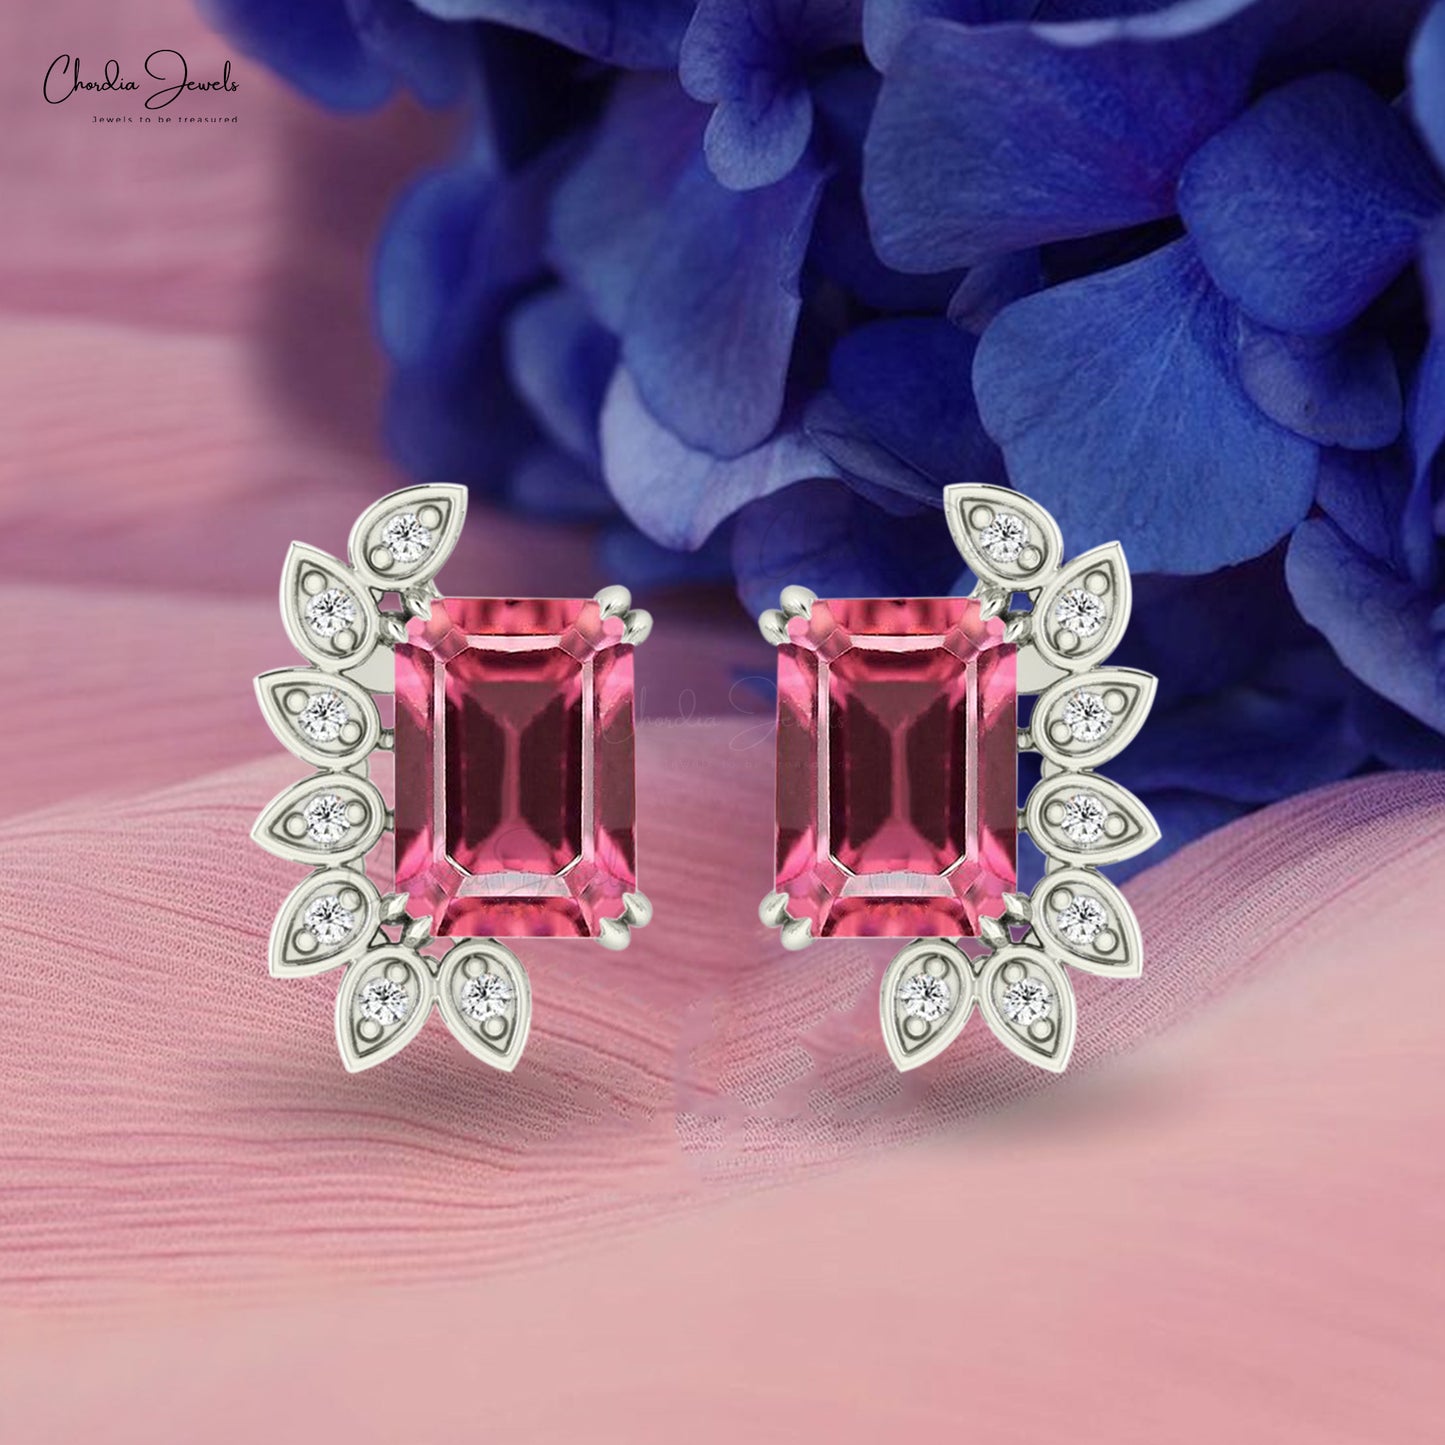 Load image into Gallery viewer, Natural Pink Tourmaline Prong Set Earrings 14k Solid Gold Diamond Earrings For October Birthstone
